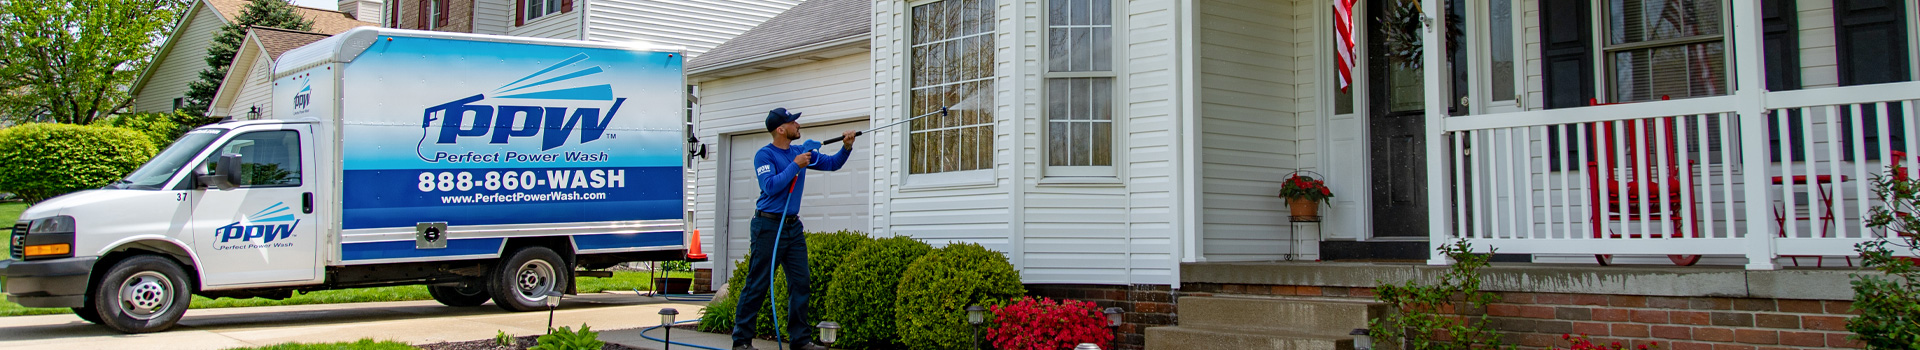 Power Washing Services in Happy Valley OR